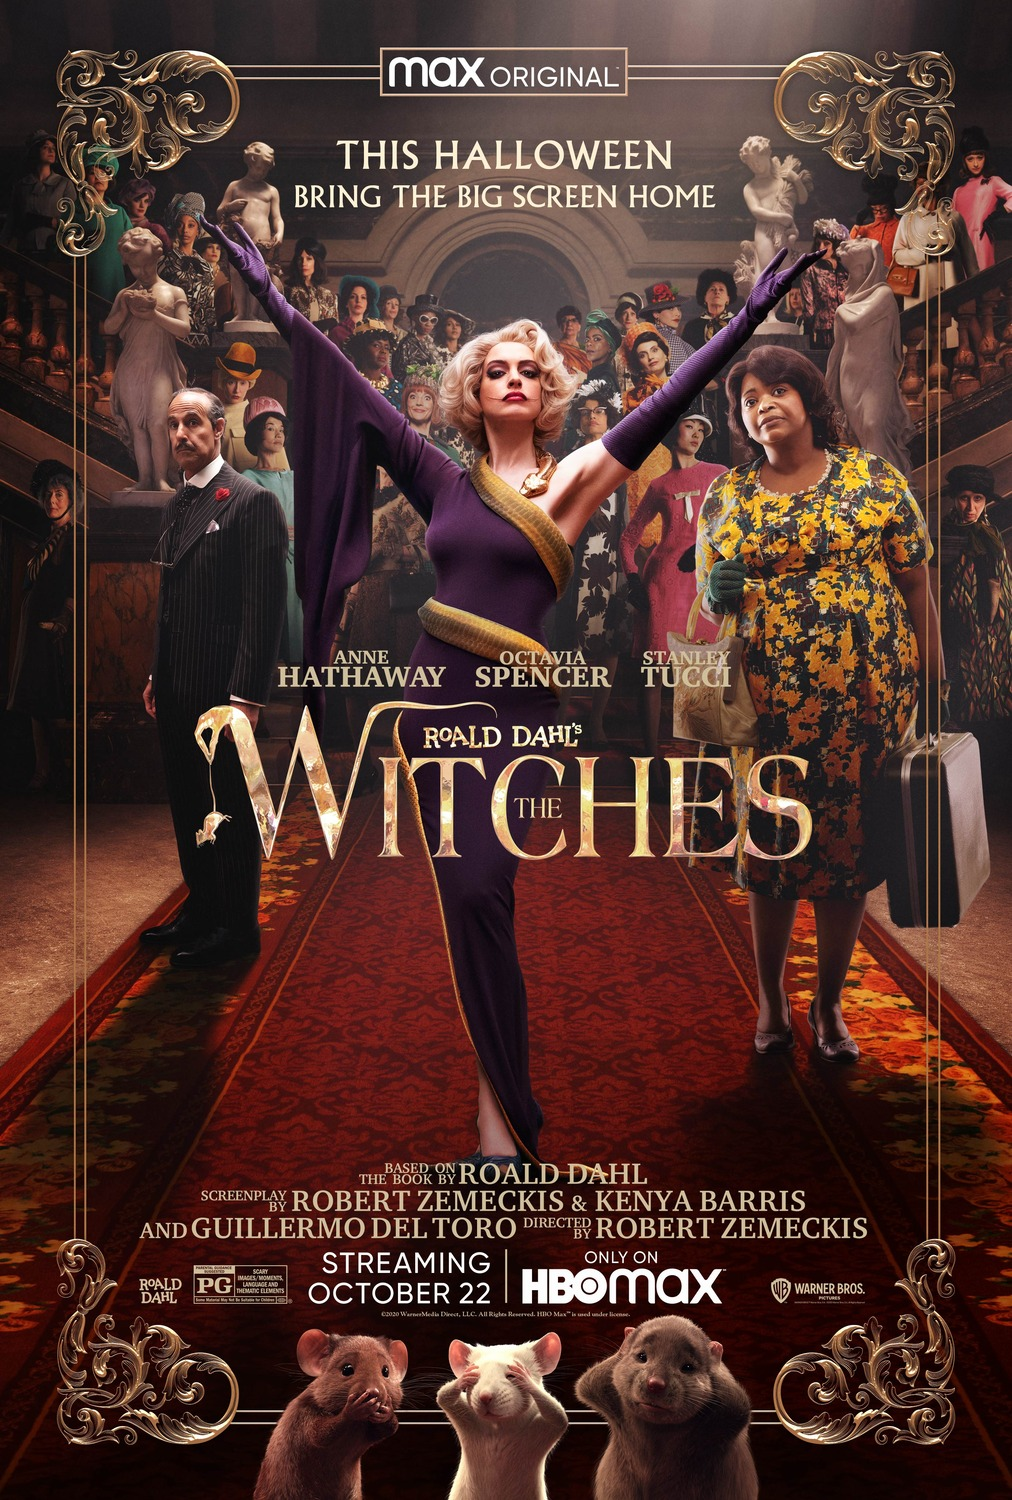 The Witches (2020 film) Warner Bros foto